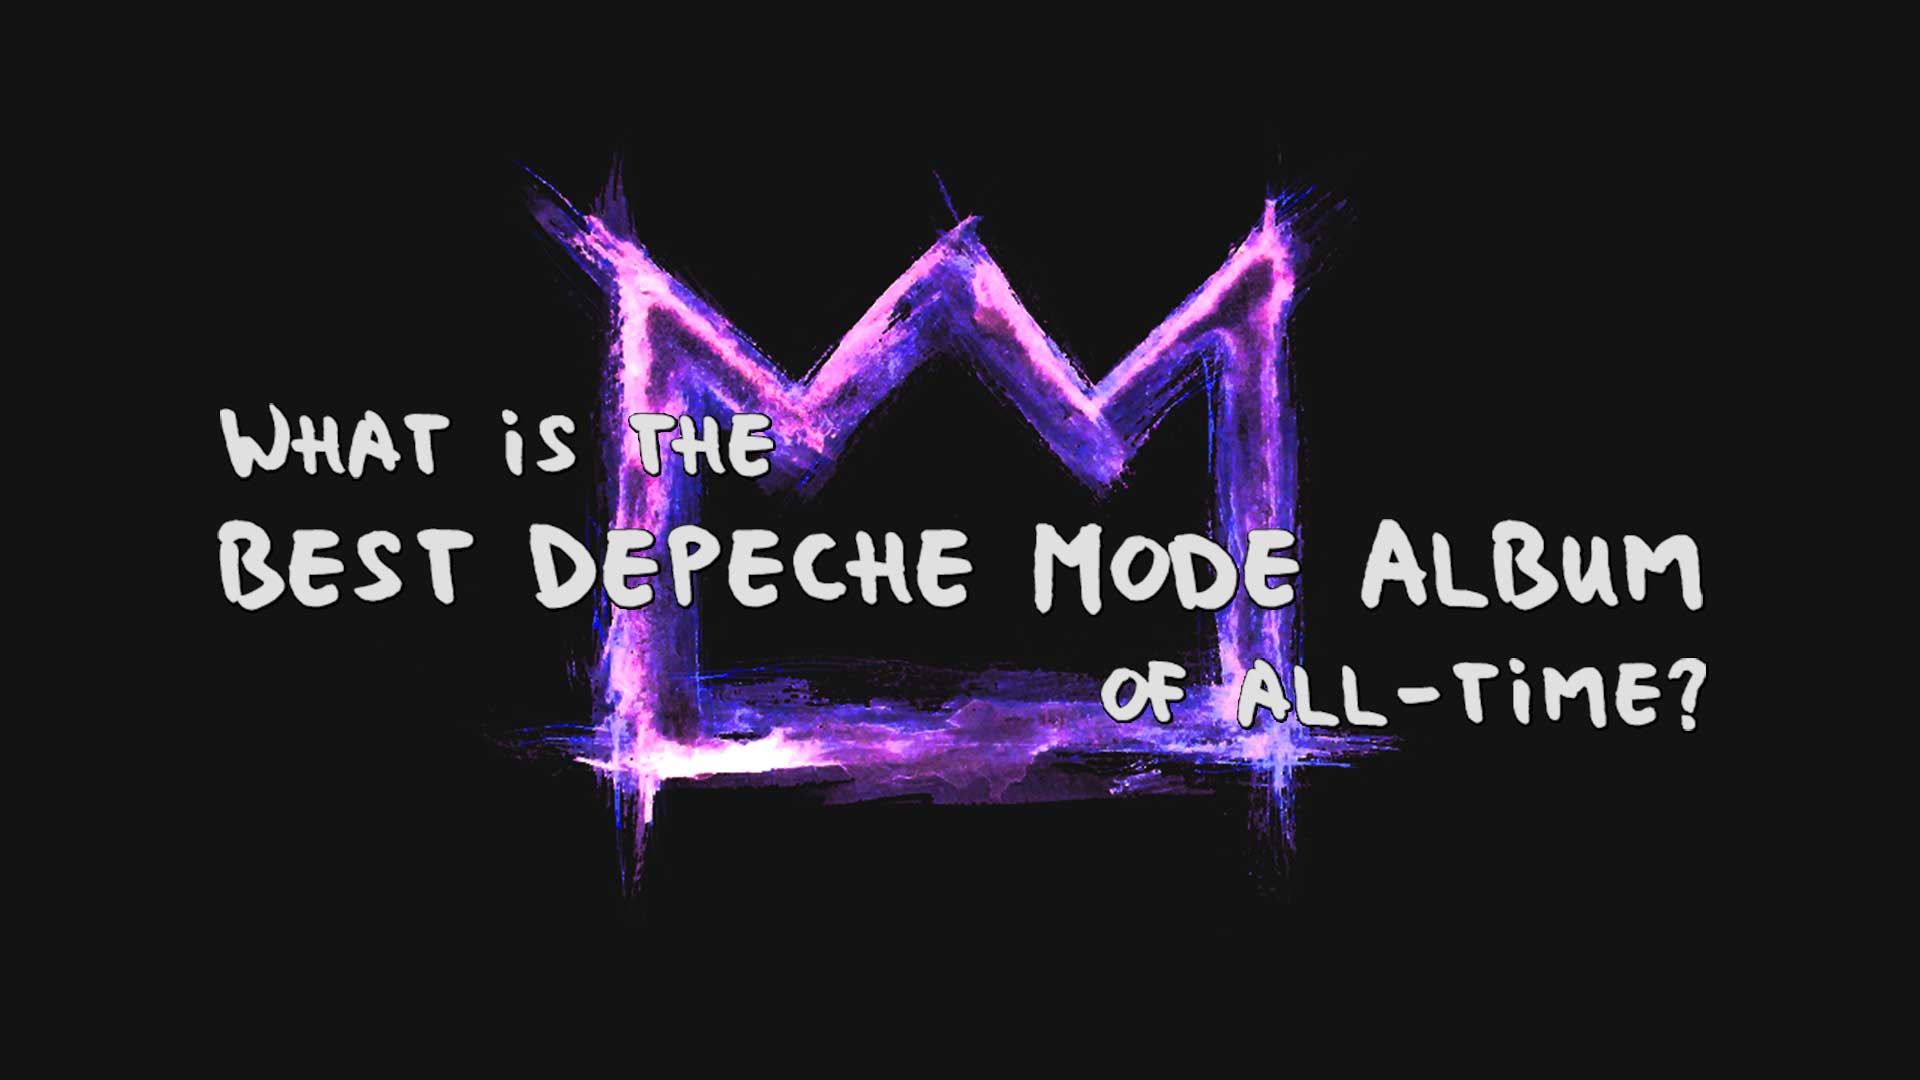 Depeche Mode  Latest News, Stories, and Commentary